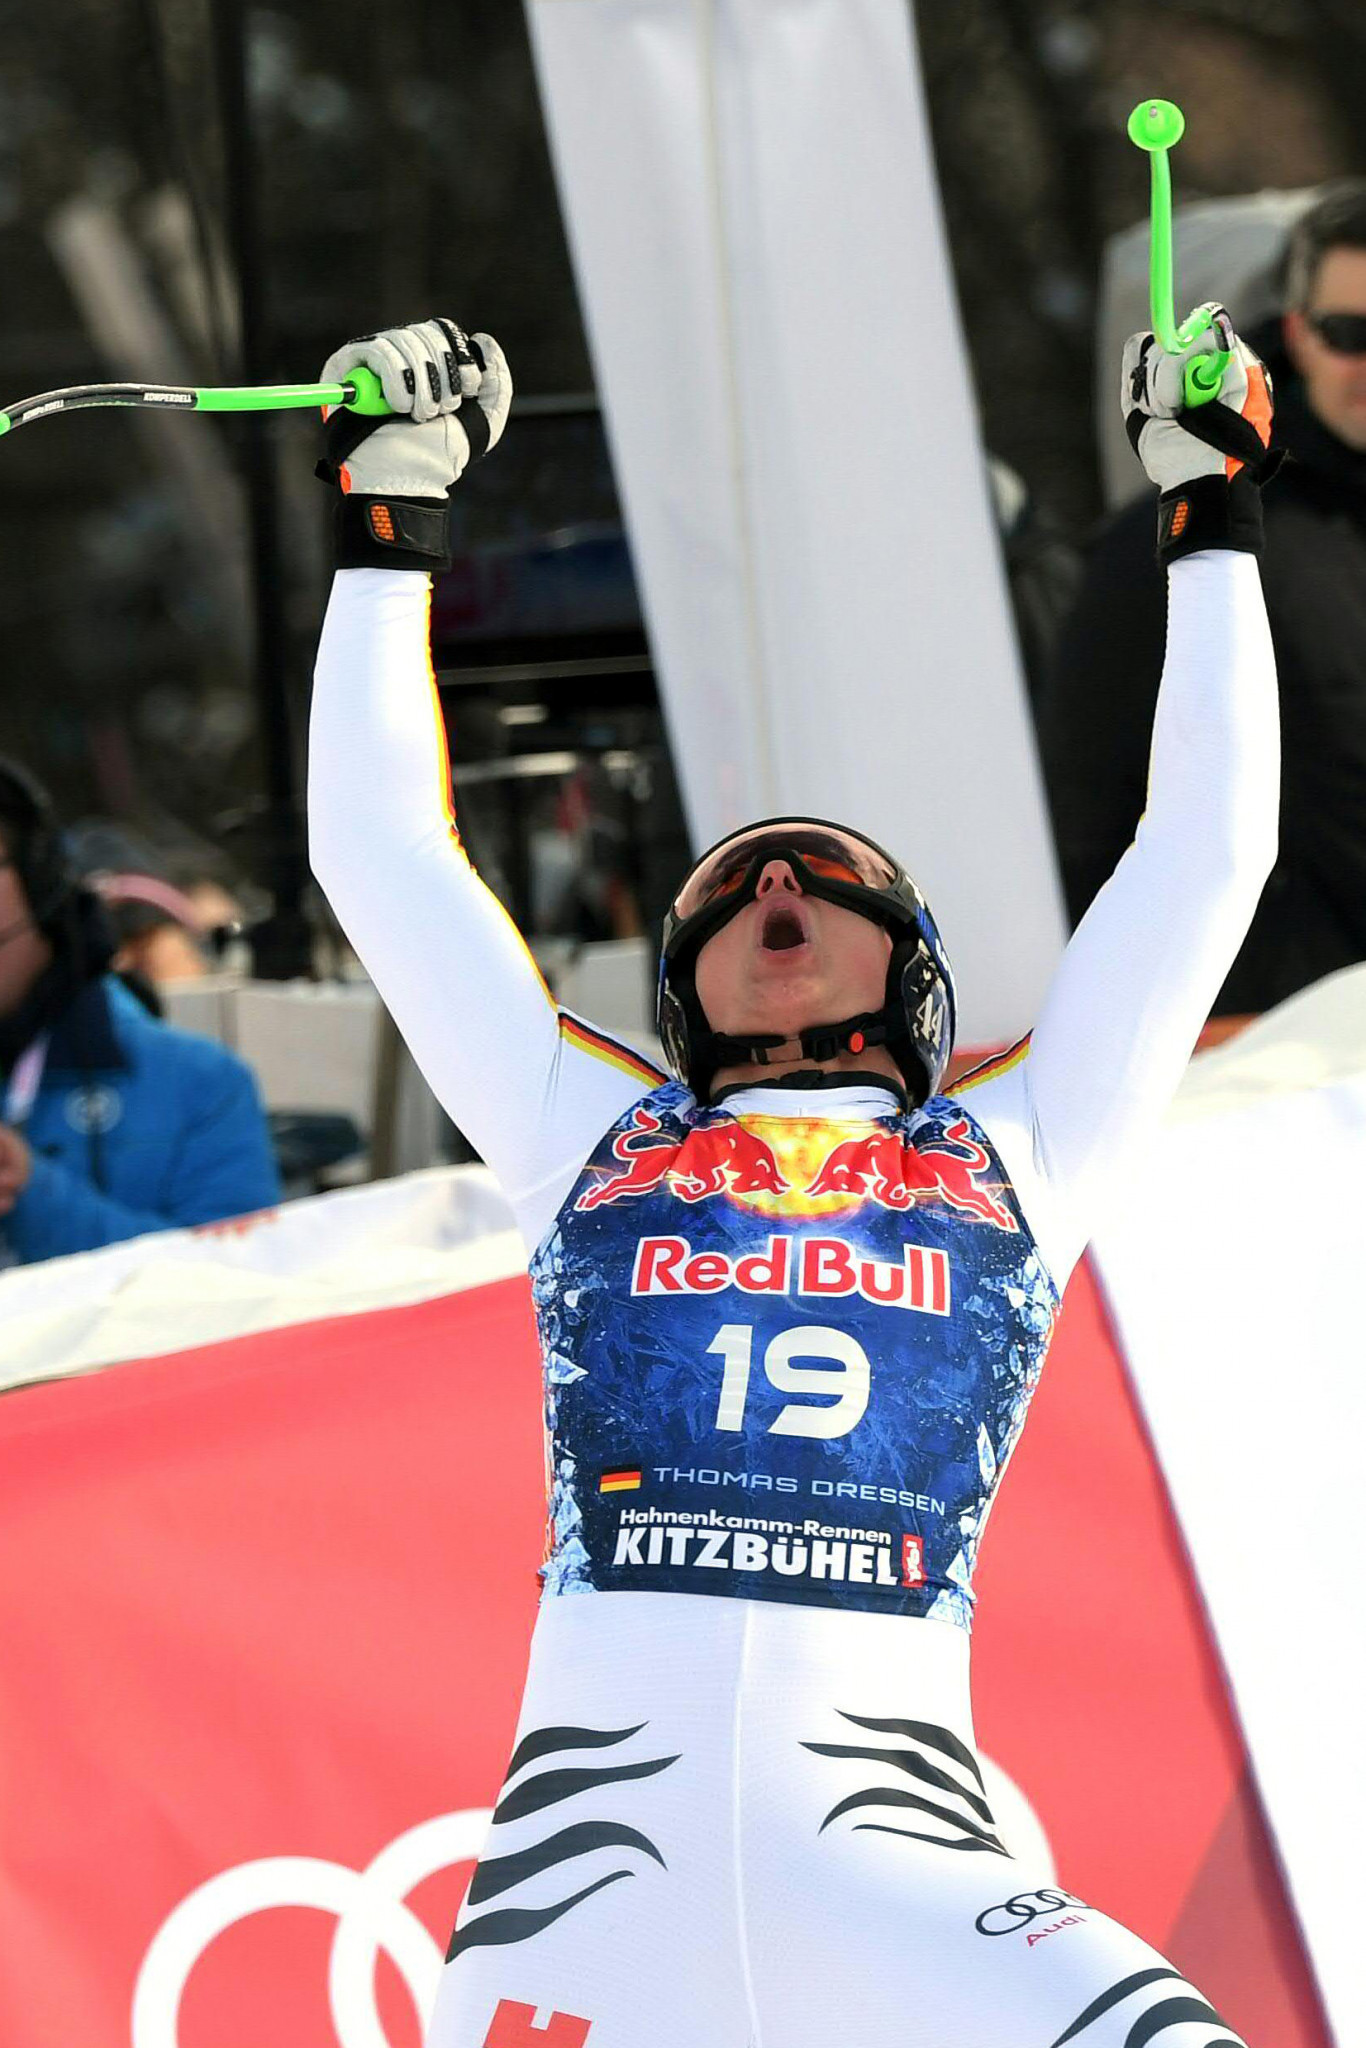 Germany's Thomas Dreßen claimed a shock downhill win in Kitzbühel ©Getty Images